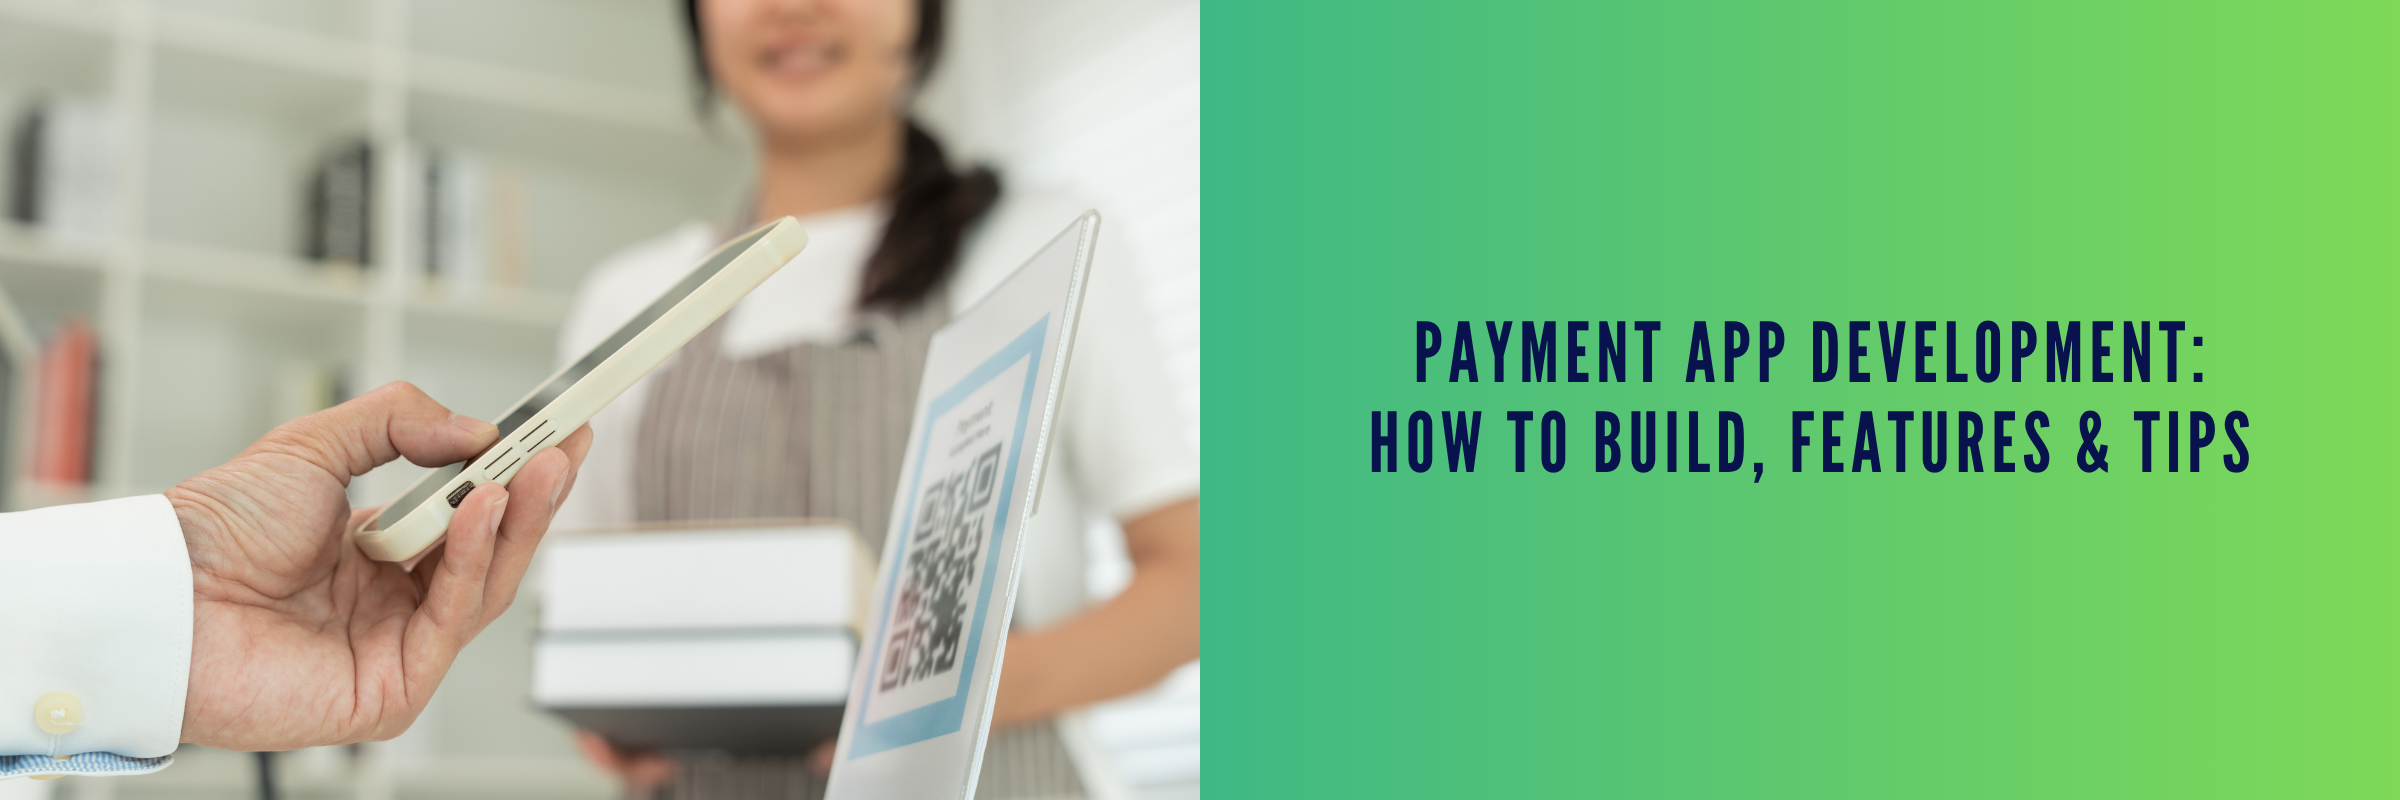 Payment App Development: How to build, features & tips